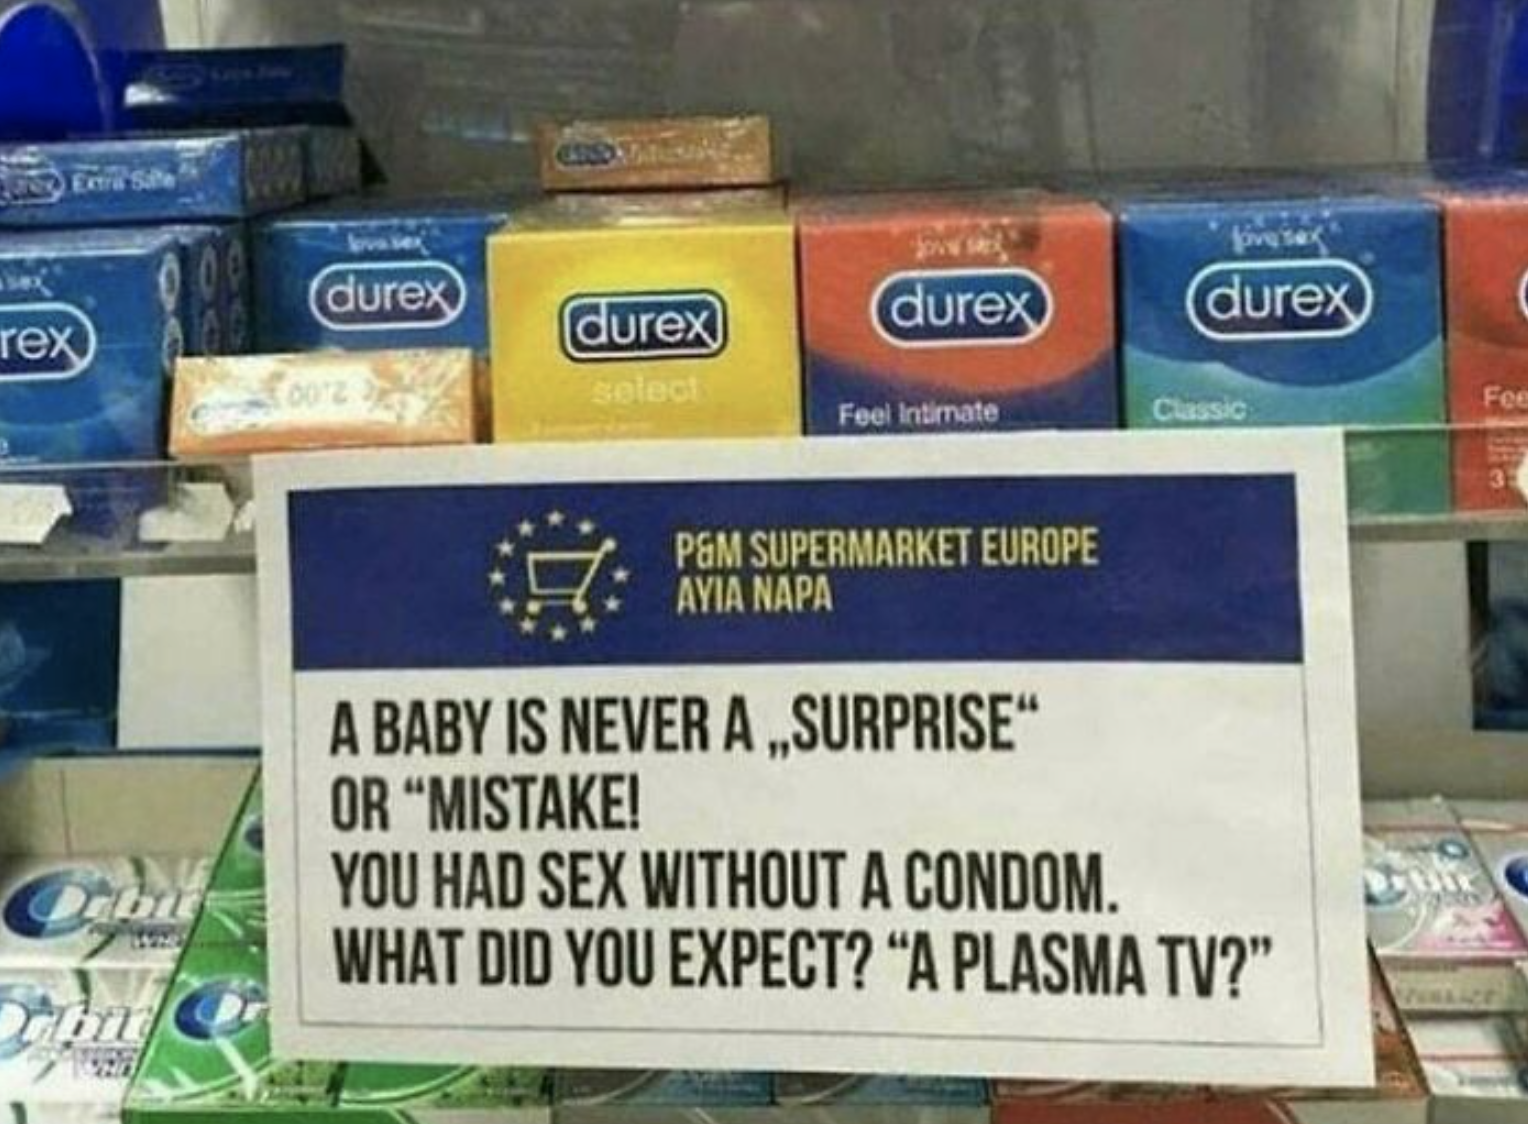 a baby is never a surprise or mistake, you had sex without a condom, what did you expect, a plasma tv